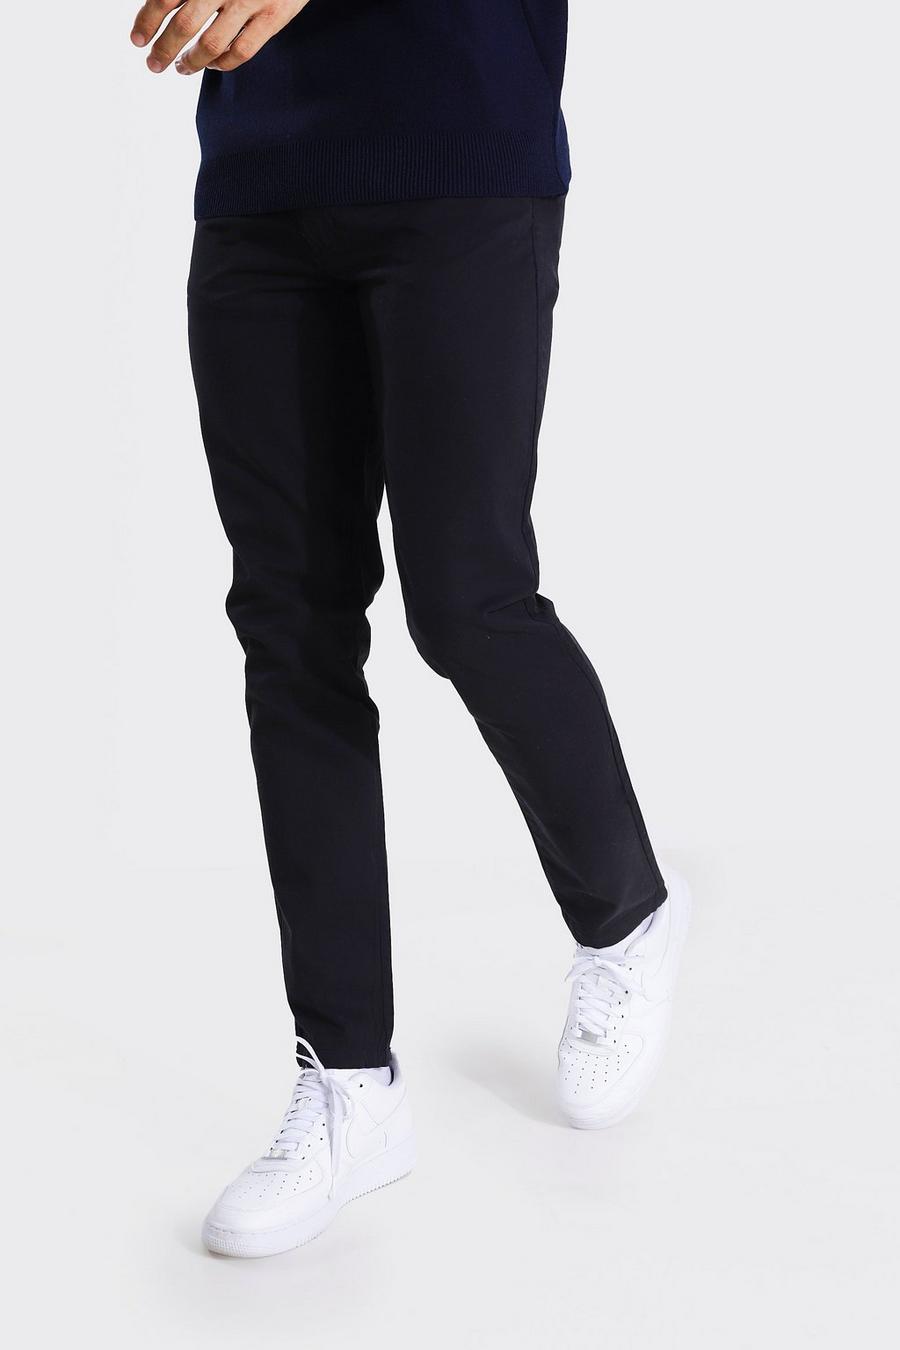 Black Tall Slim Fit Chino Trouser image number 1